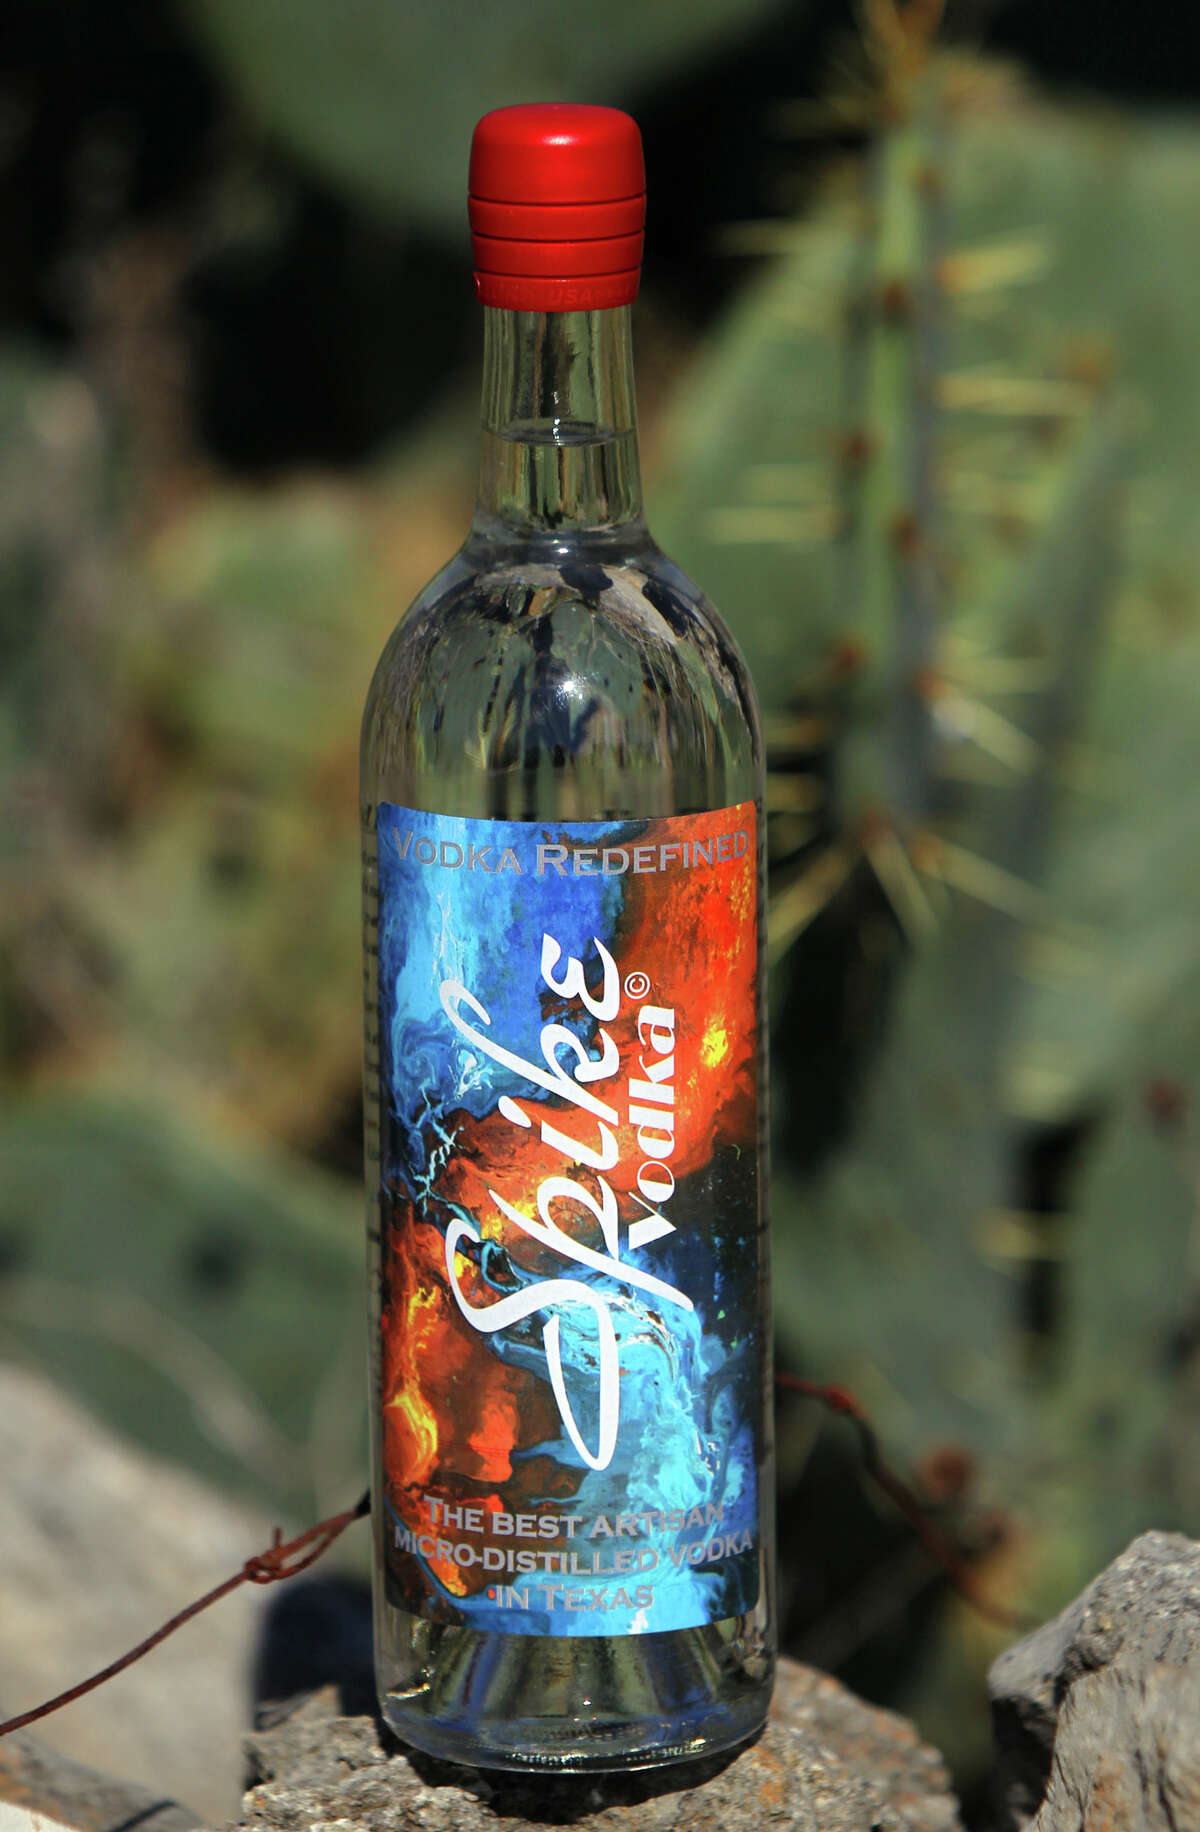 Spike Vodka is made here in San Antonio by company founder Nick Spink and master distiller Rachel Price. Price and Spink use prickly pear cactus to make Spike Vodka.